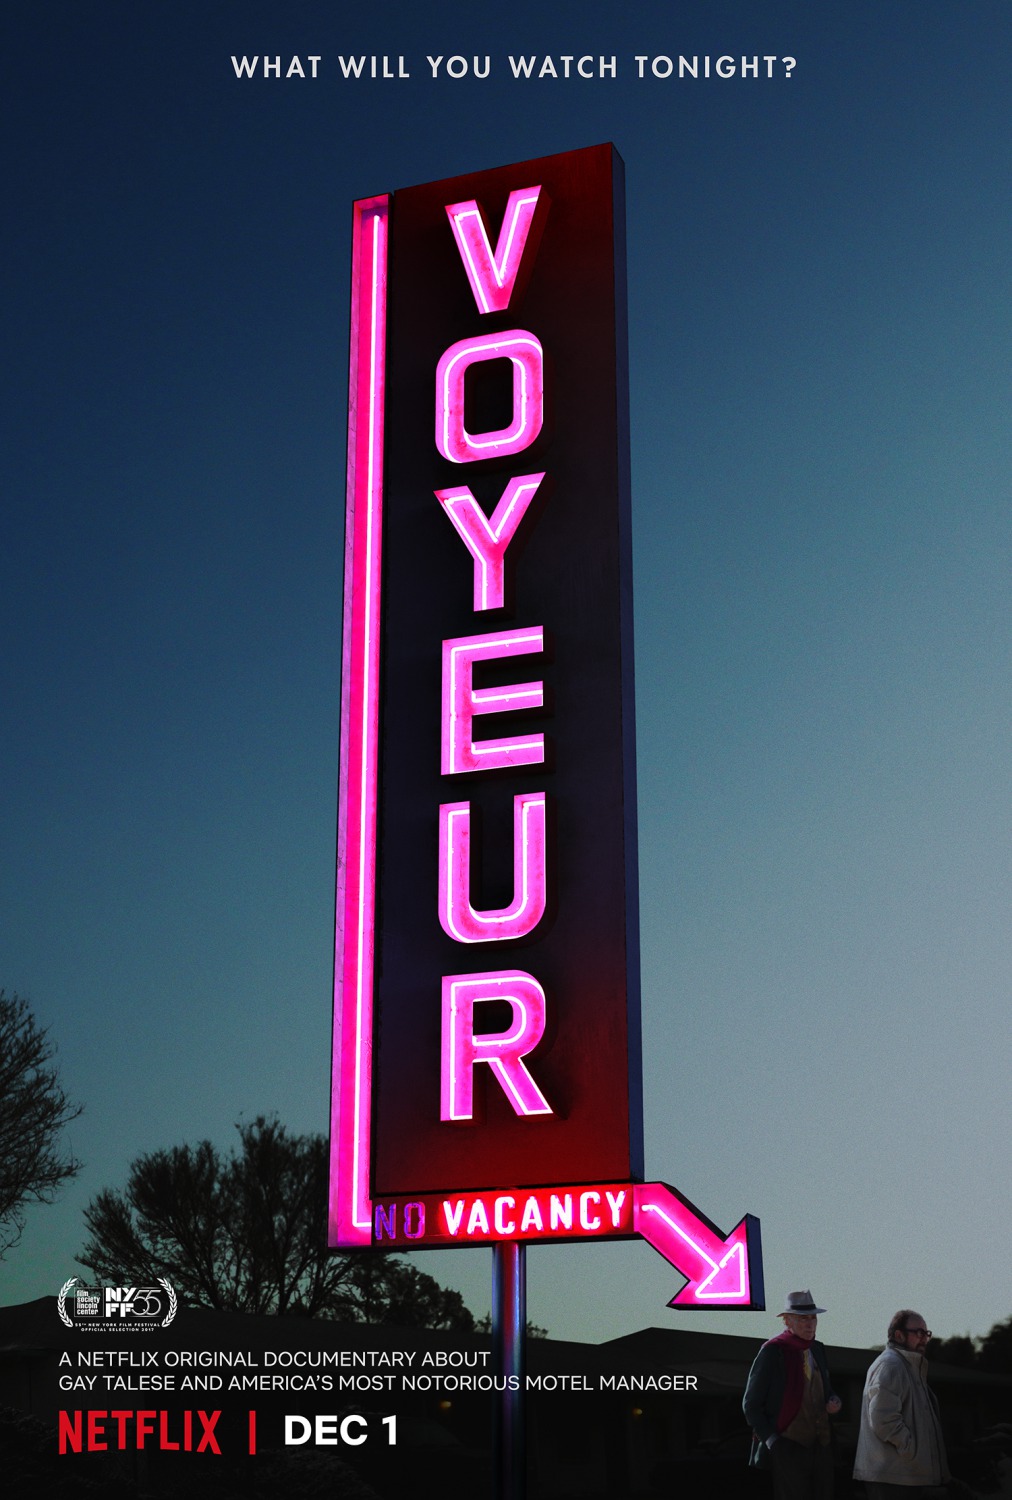 Extra Large TV Poster Image for Voyeur 